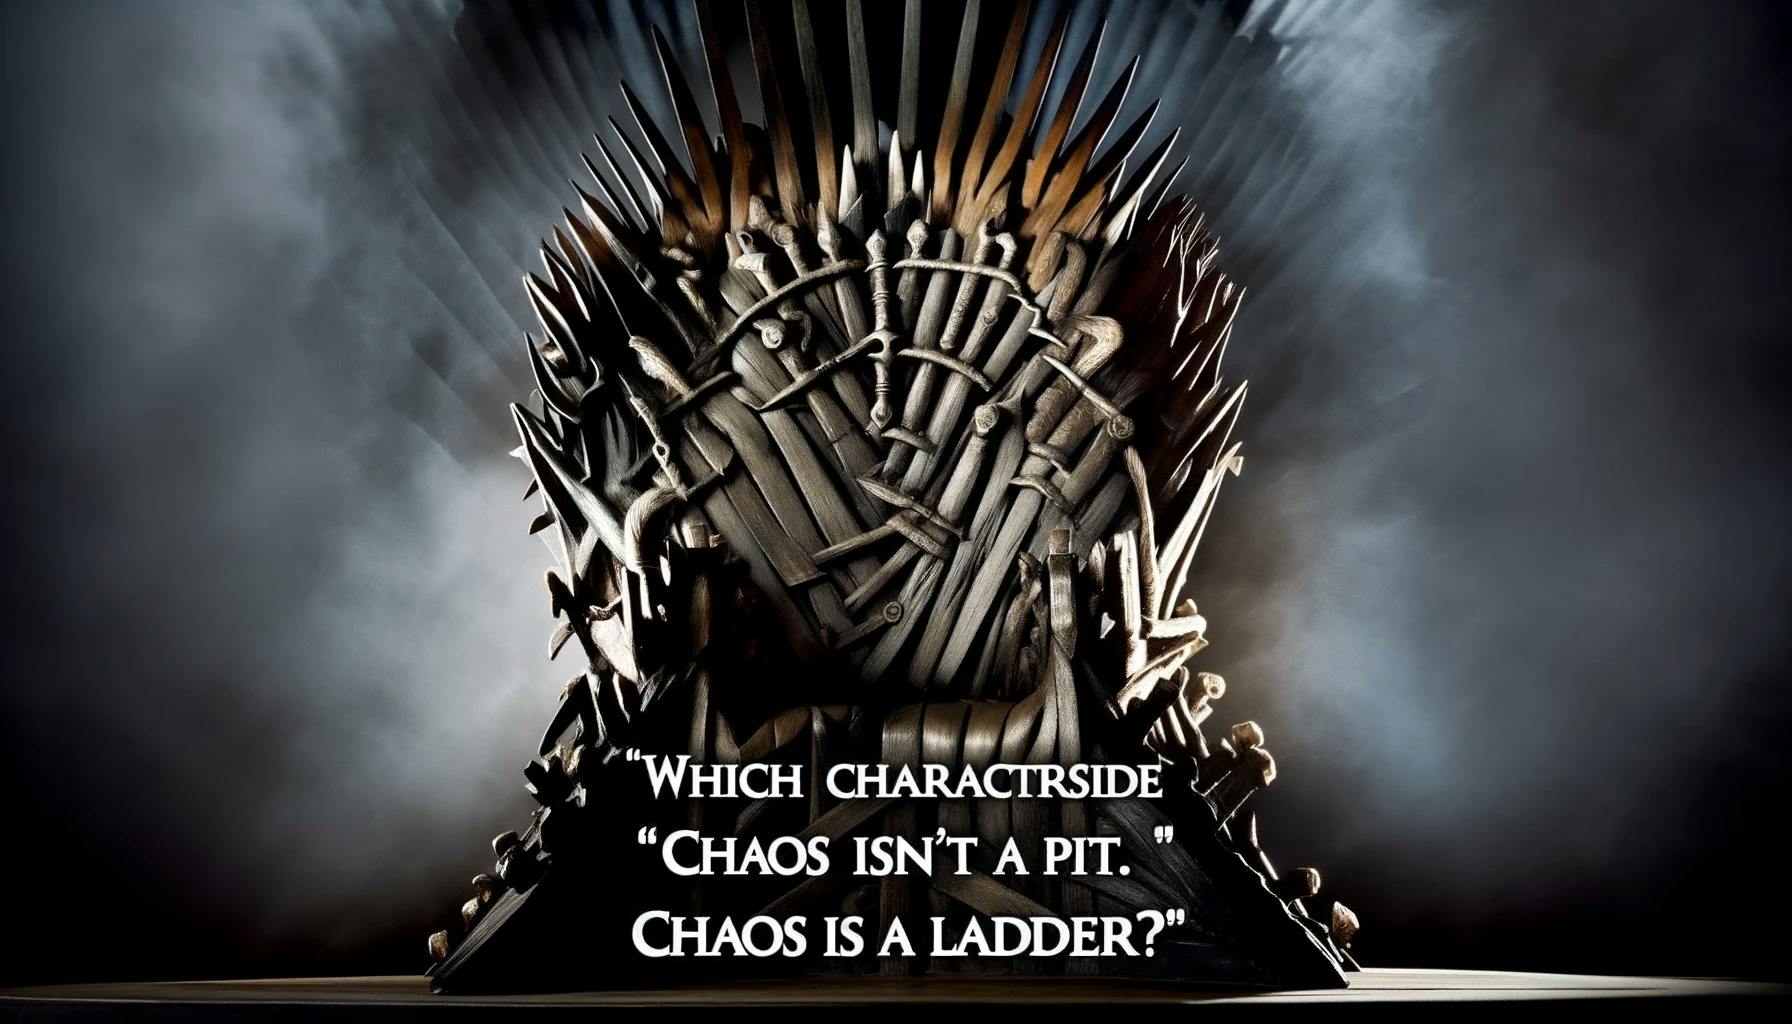 Love Game of Thrones? Wish you could explore more storylines or alternate endings? Discover how ChatGPT can make your Westeros journey truly unforgettable.